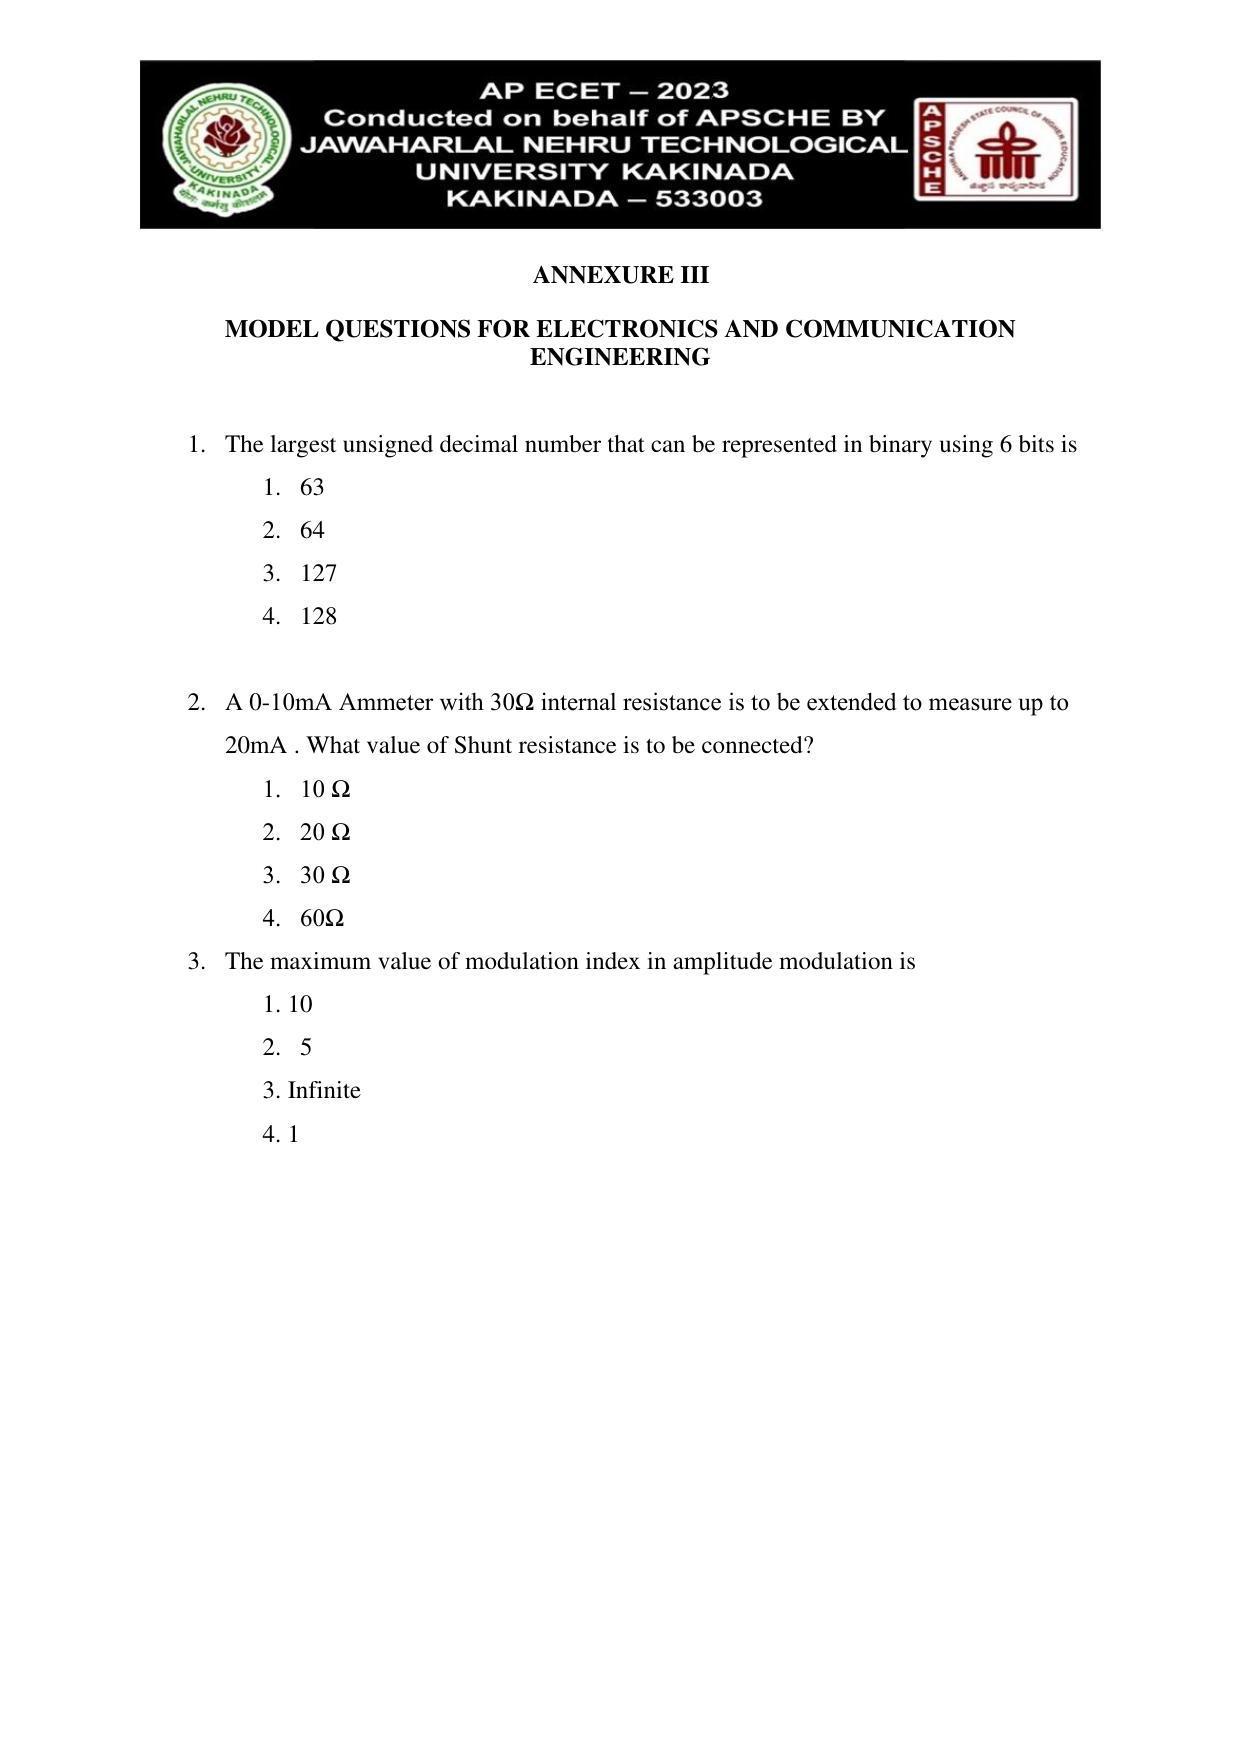 AP ECET ELECTRONICS AND COMMUNICATION ENGINEERING Syllabus - Page 4